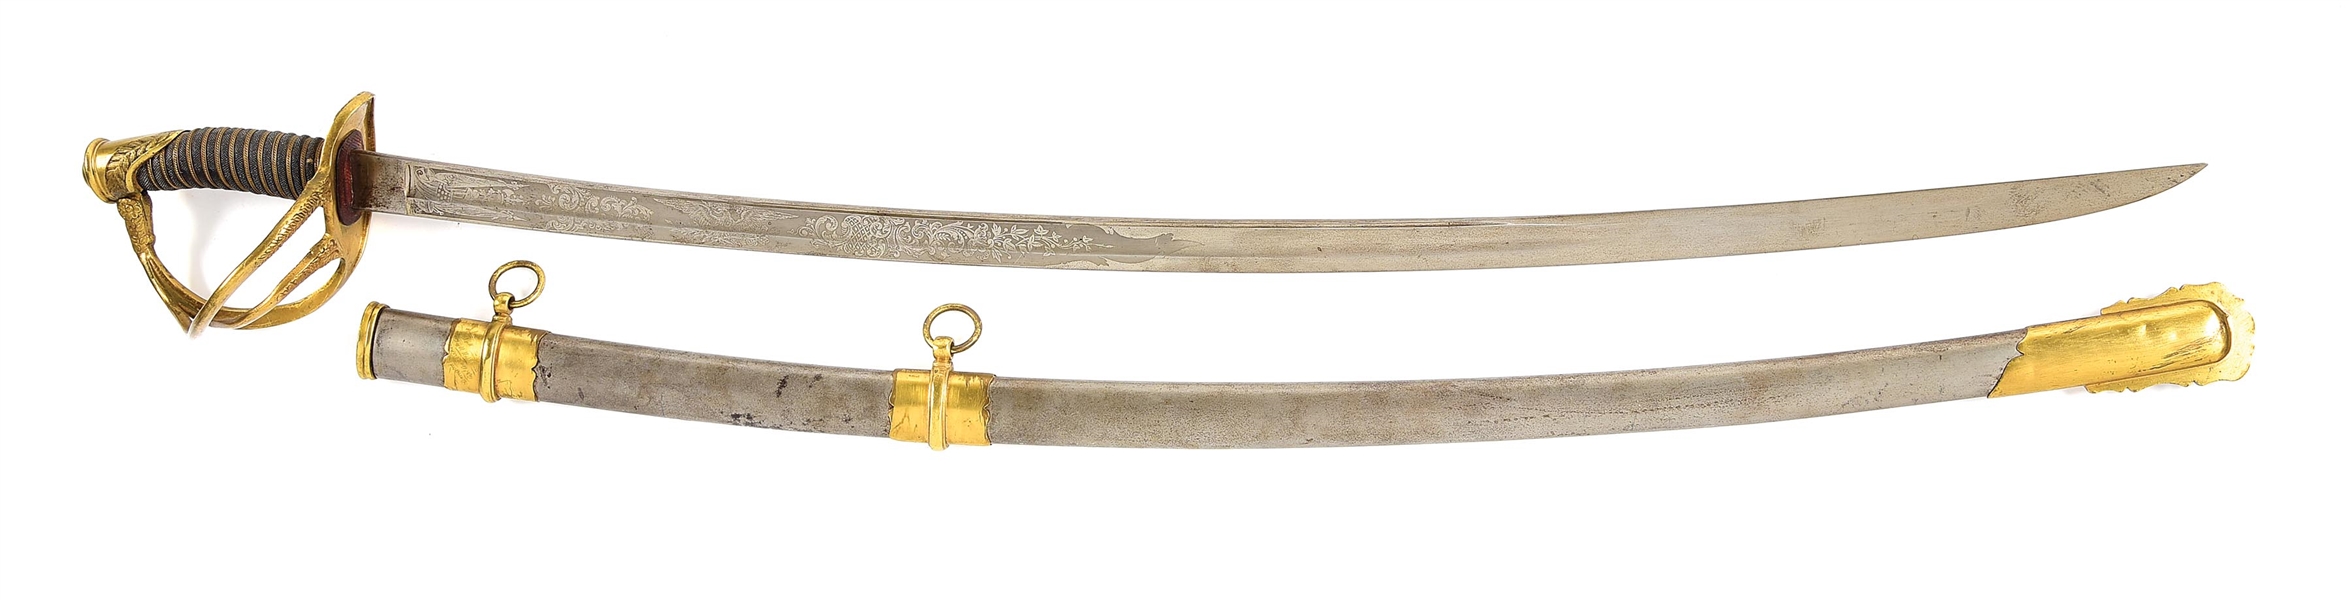 PRESENTATION GRADE MODEL 1840 CAVALRY SABER PRESENTED TO CAPTAIN CHARLES M. SCHAD, 3RD MARYLAND, WOUNDED AT CEDAR MOUNTAIN.